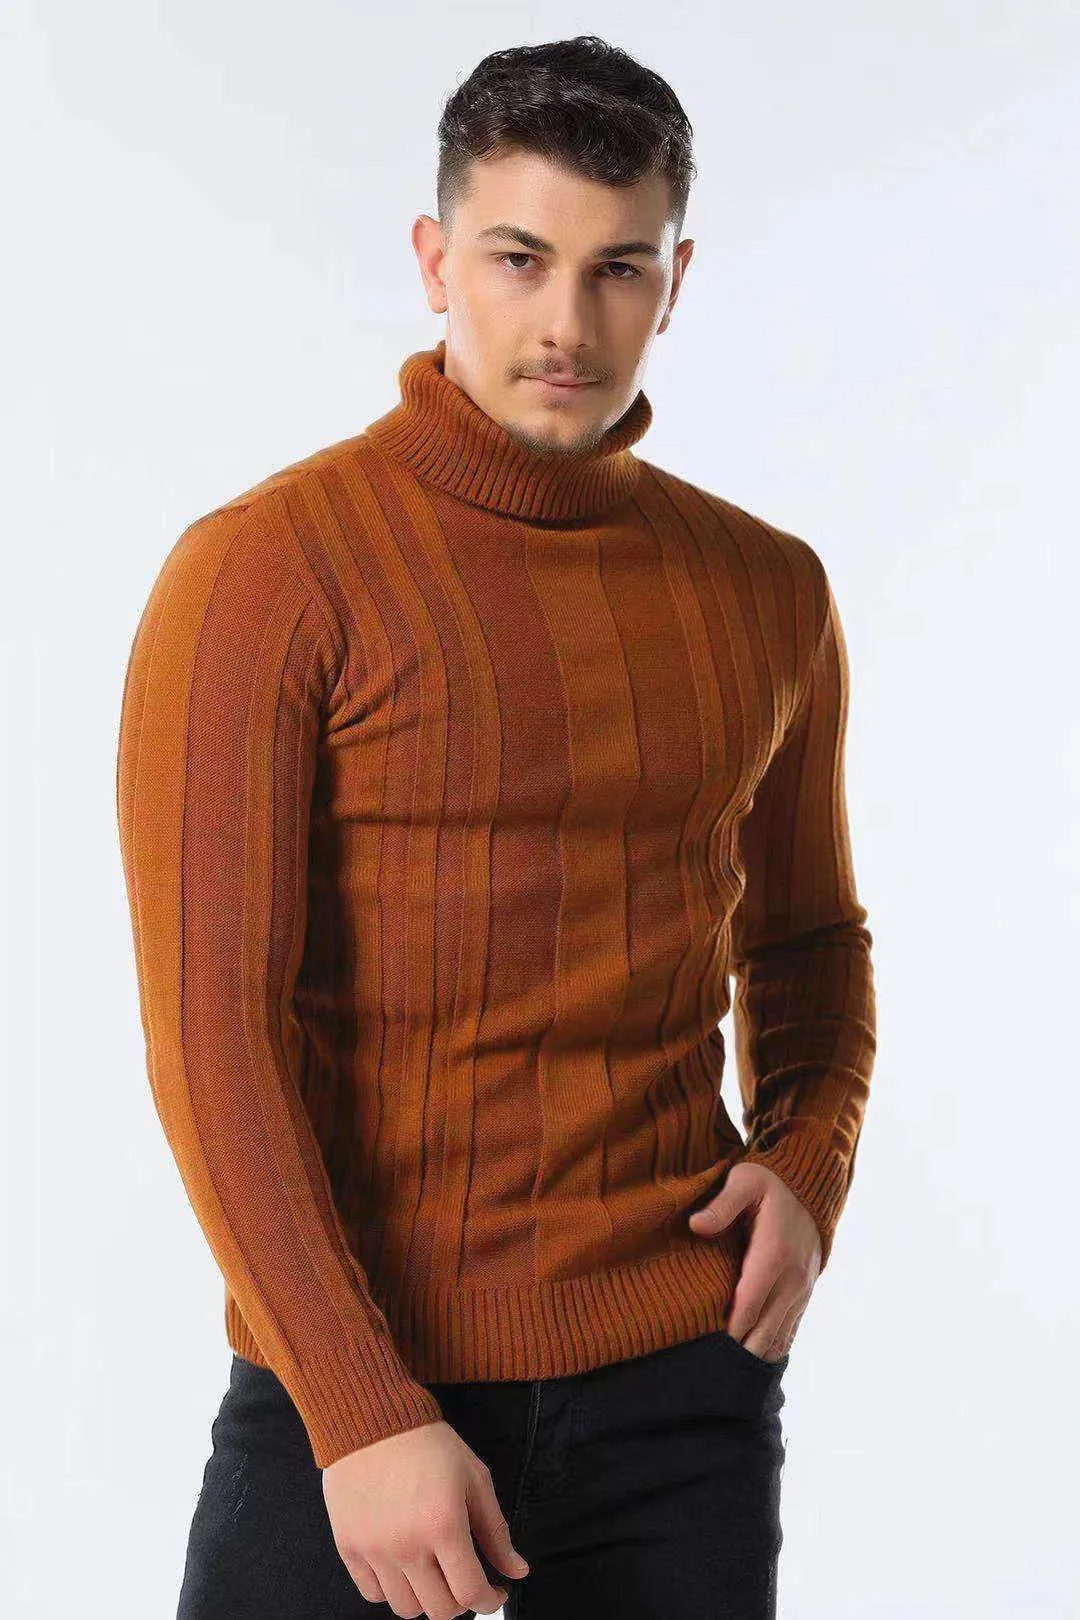 Aiopeson Slim Fit Pullovers Turtleneck Mannen Casual Basic Solid Color Warm Striped Sweater Mens Winter Mode Sweaters Male 211018